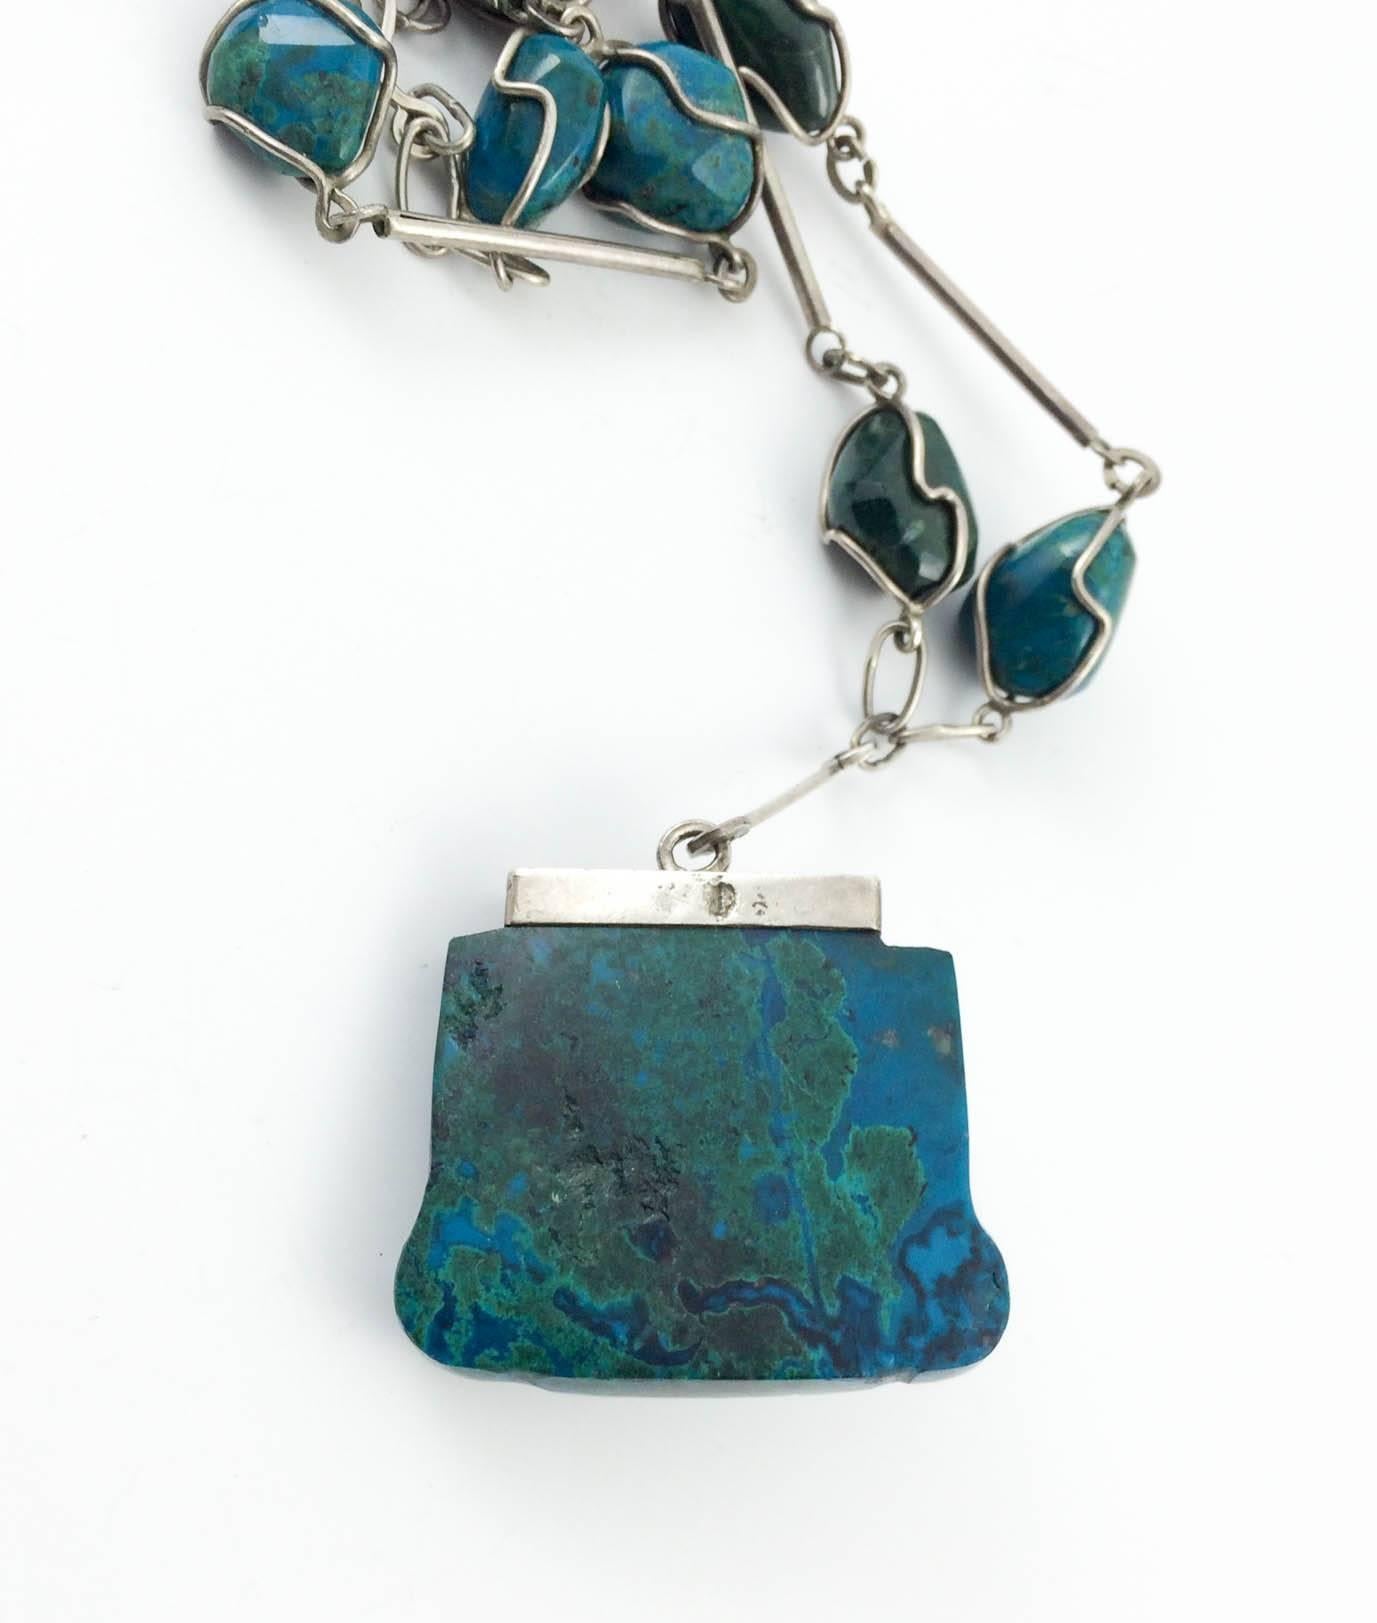 Silver and Peruvian Turquoise Necklace - 1970s 1